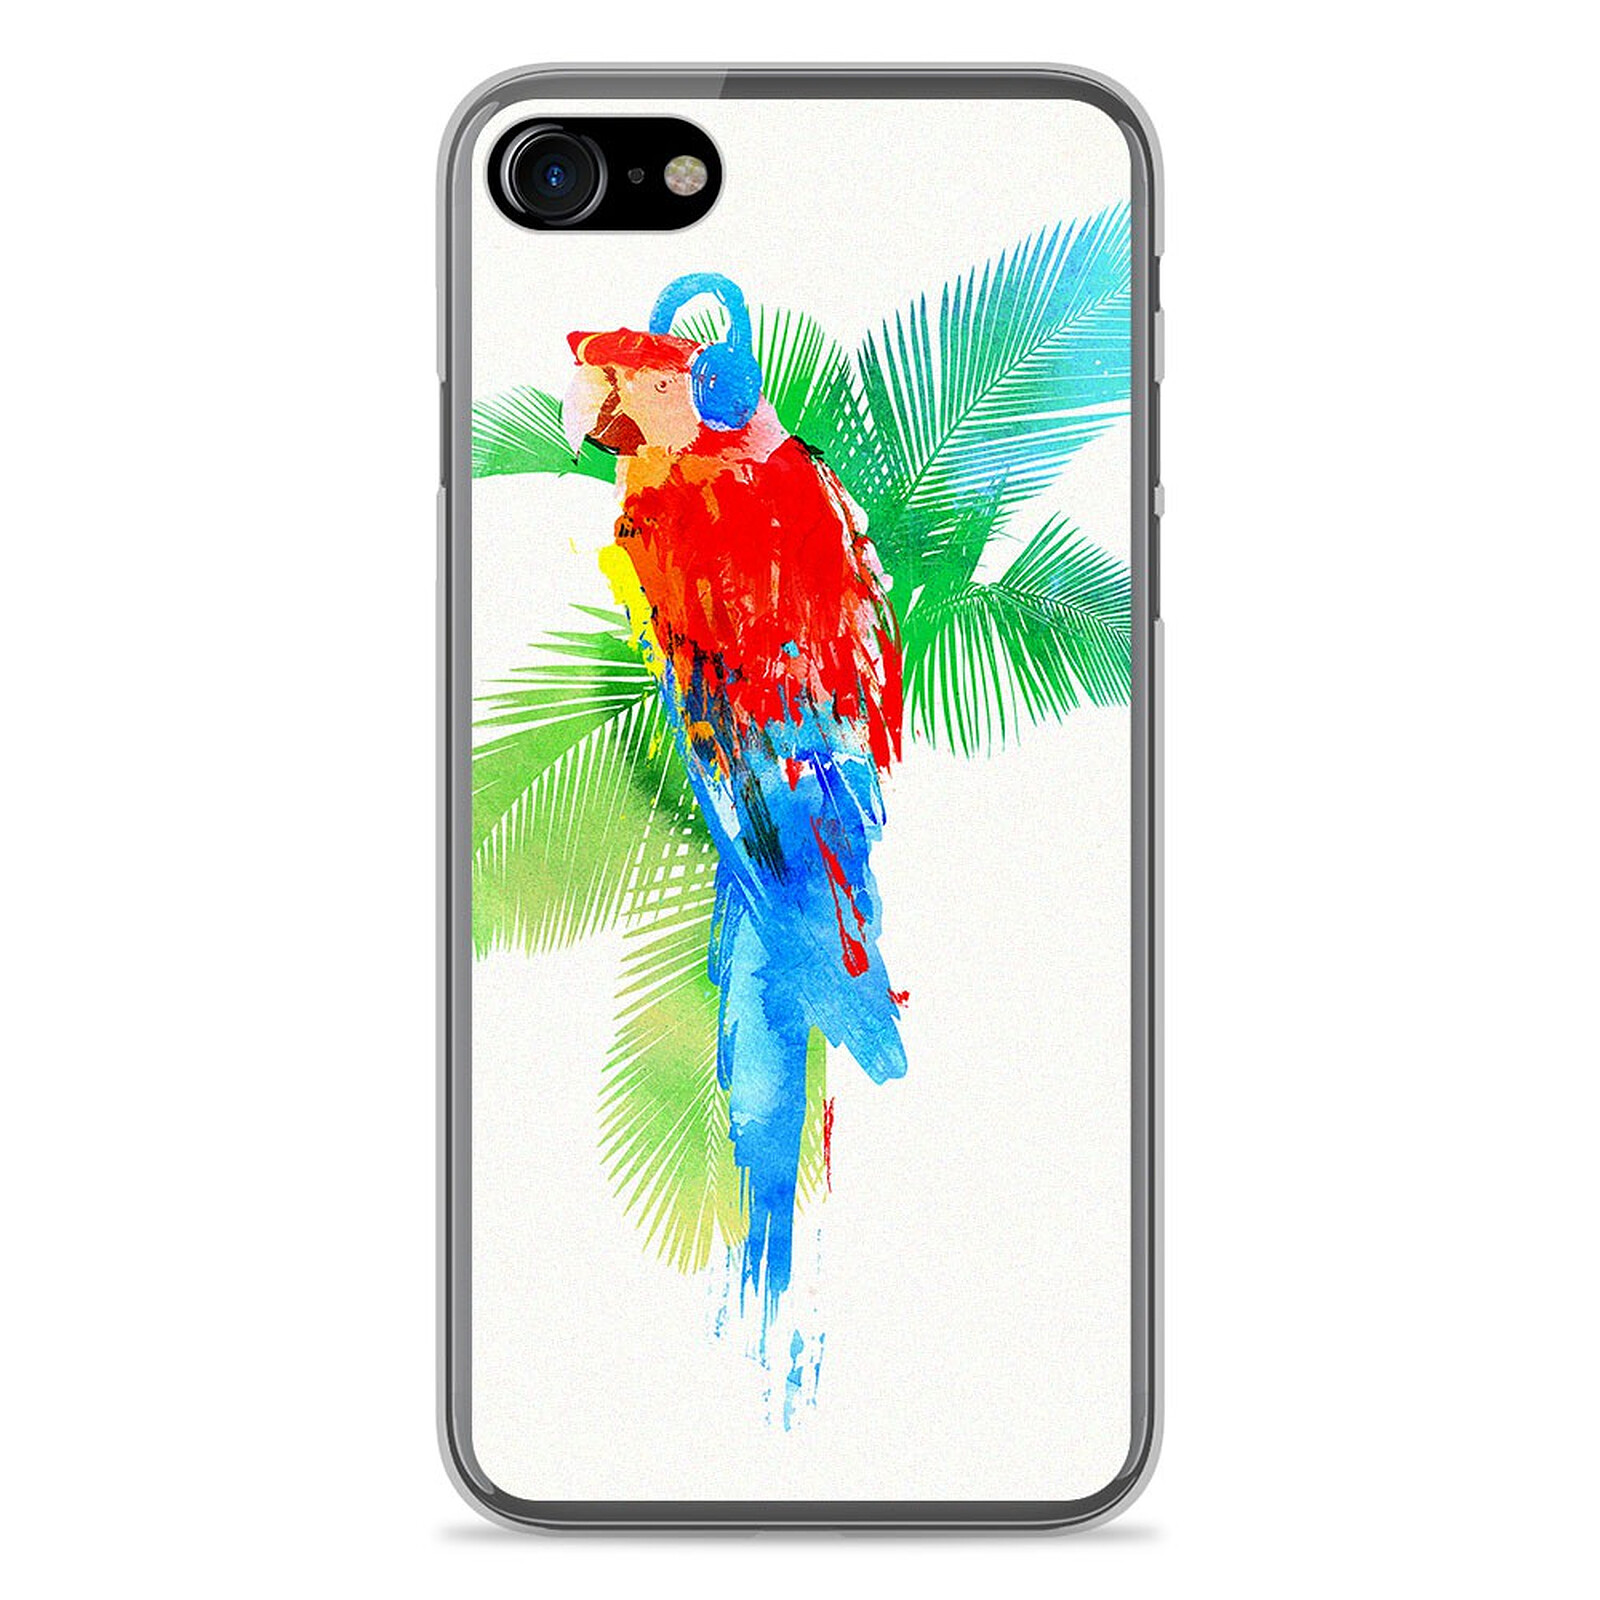 coque iphone 8 silicone tropical